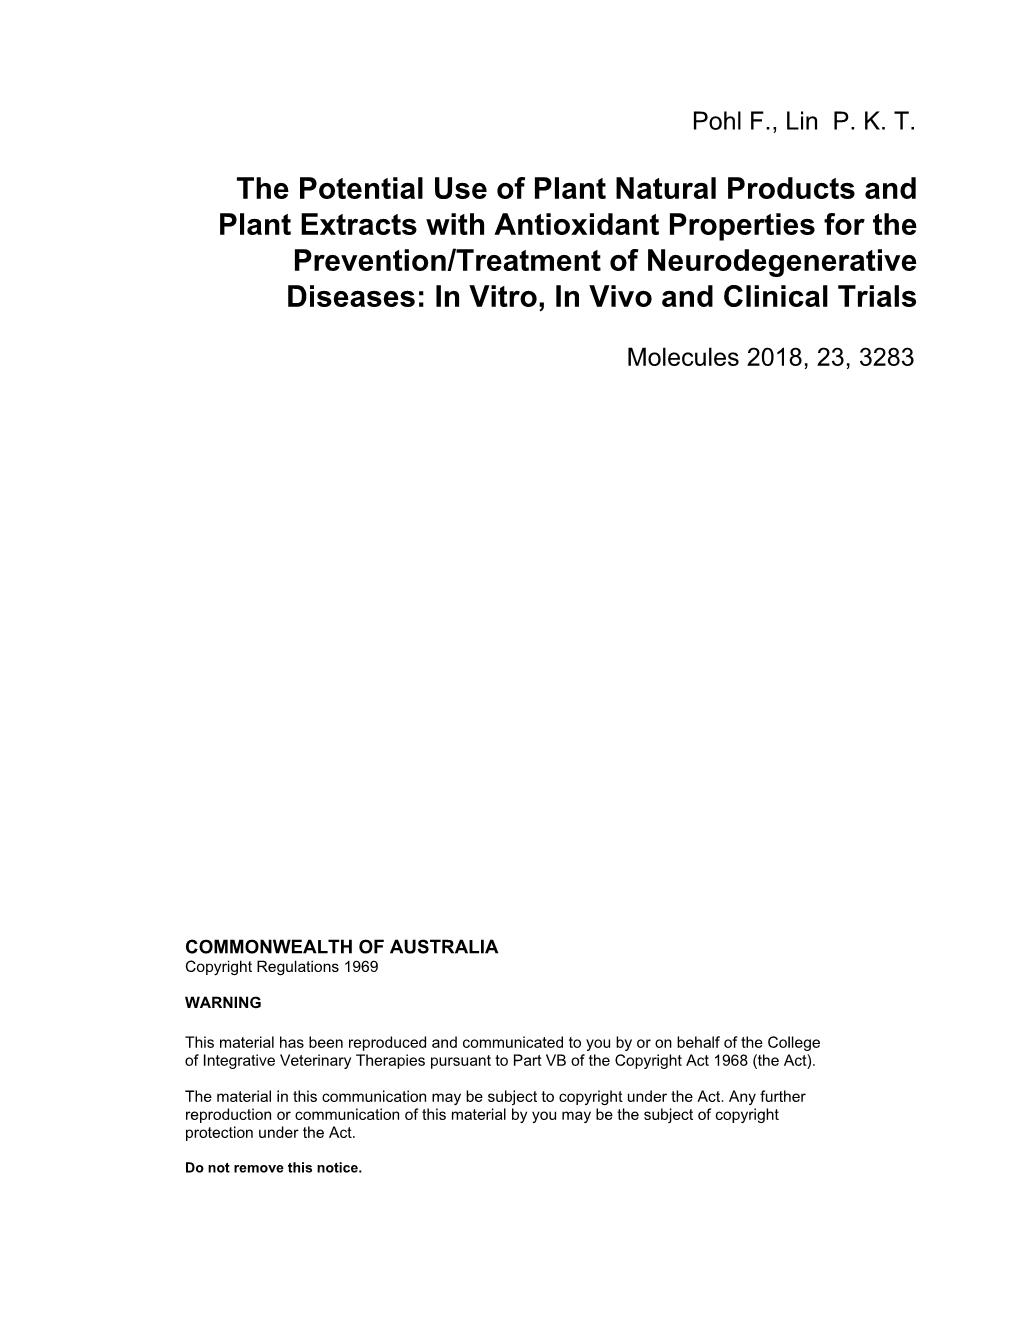 The Potential Use of Plant Natural Products and Plant Extracts With